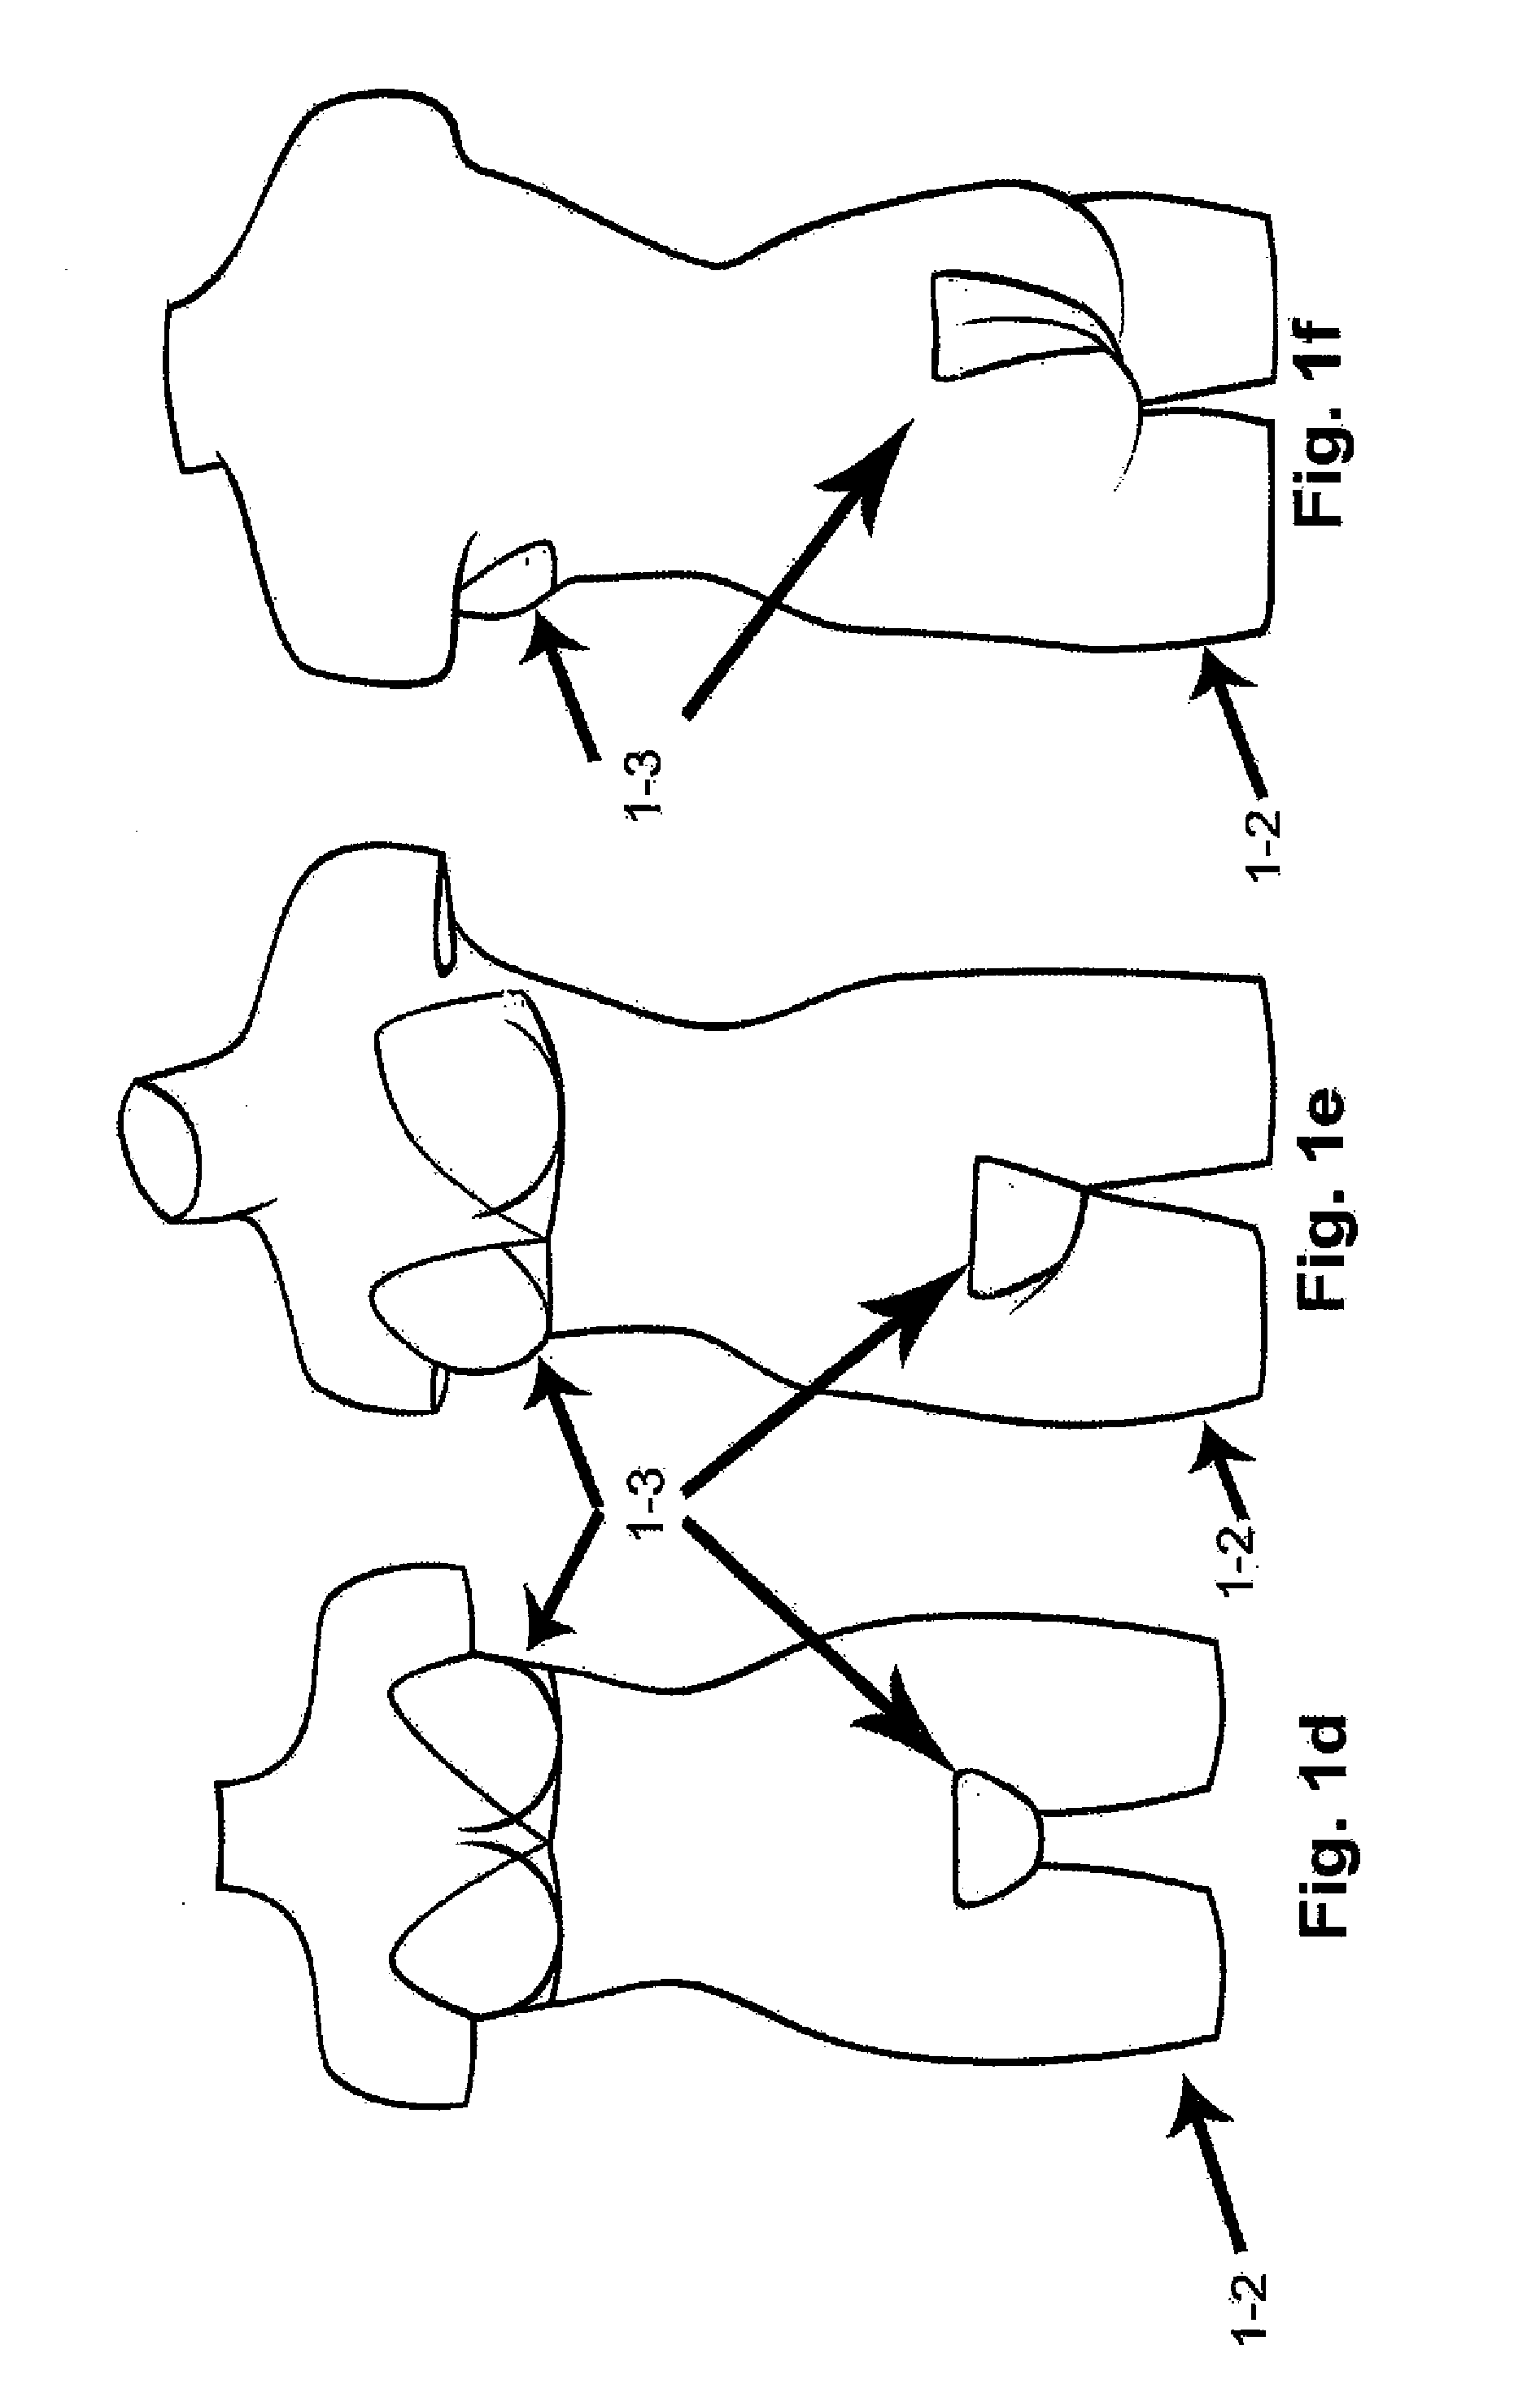 System for releasably attaching an article of clothing to a body